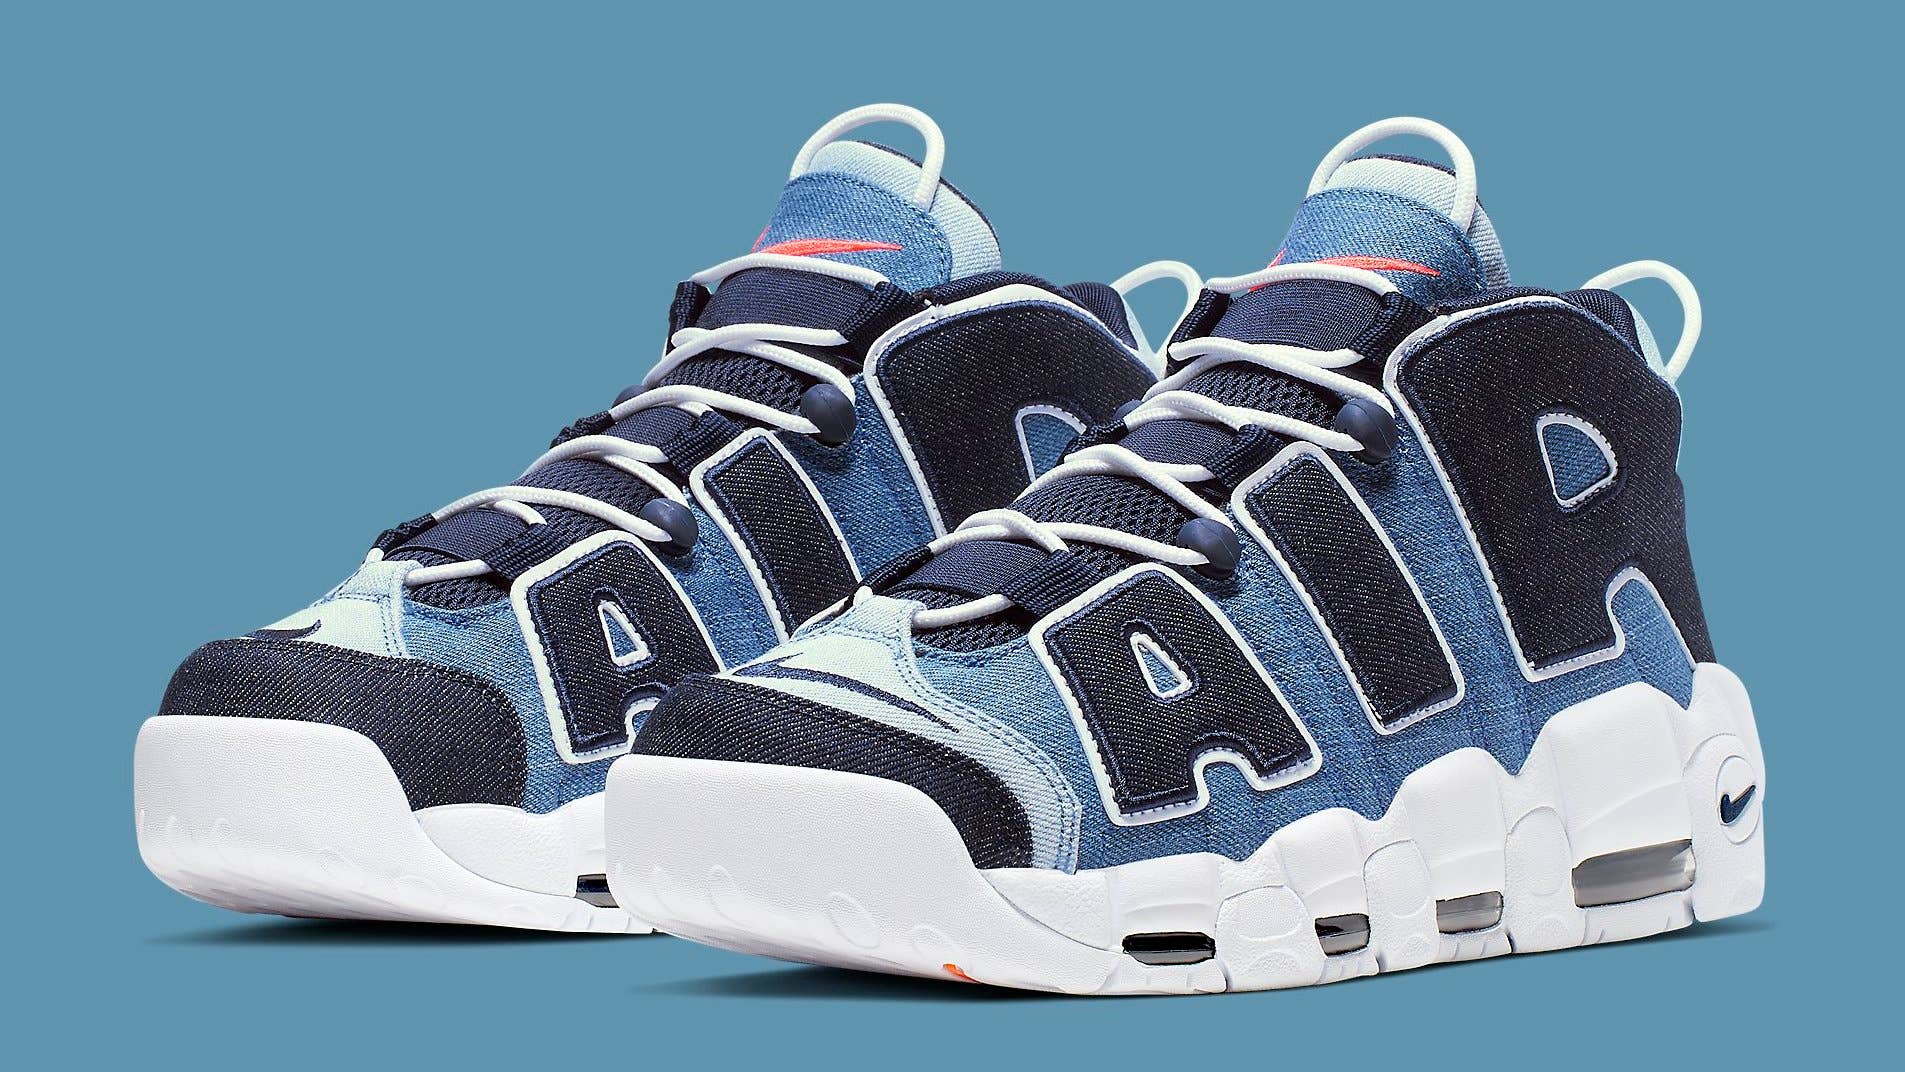 A Better Look at 'Denim' Nike Air More Uptempo